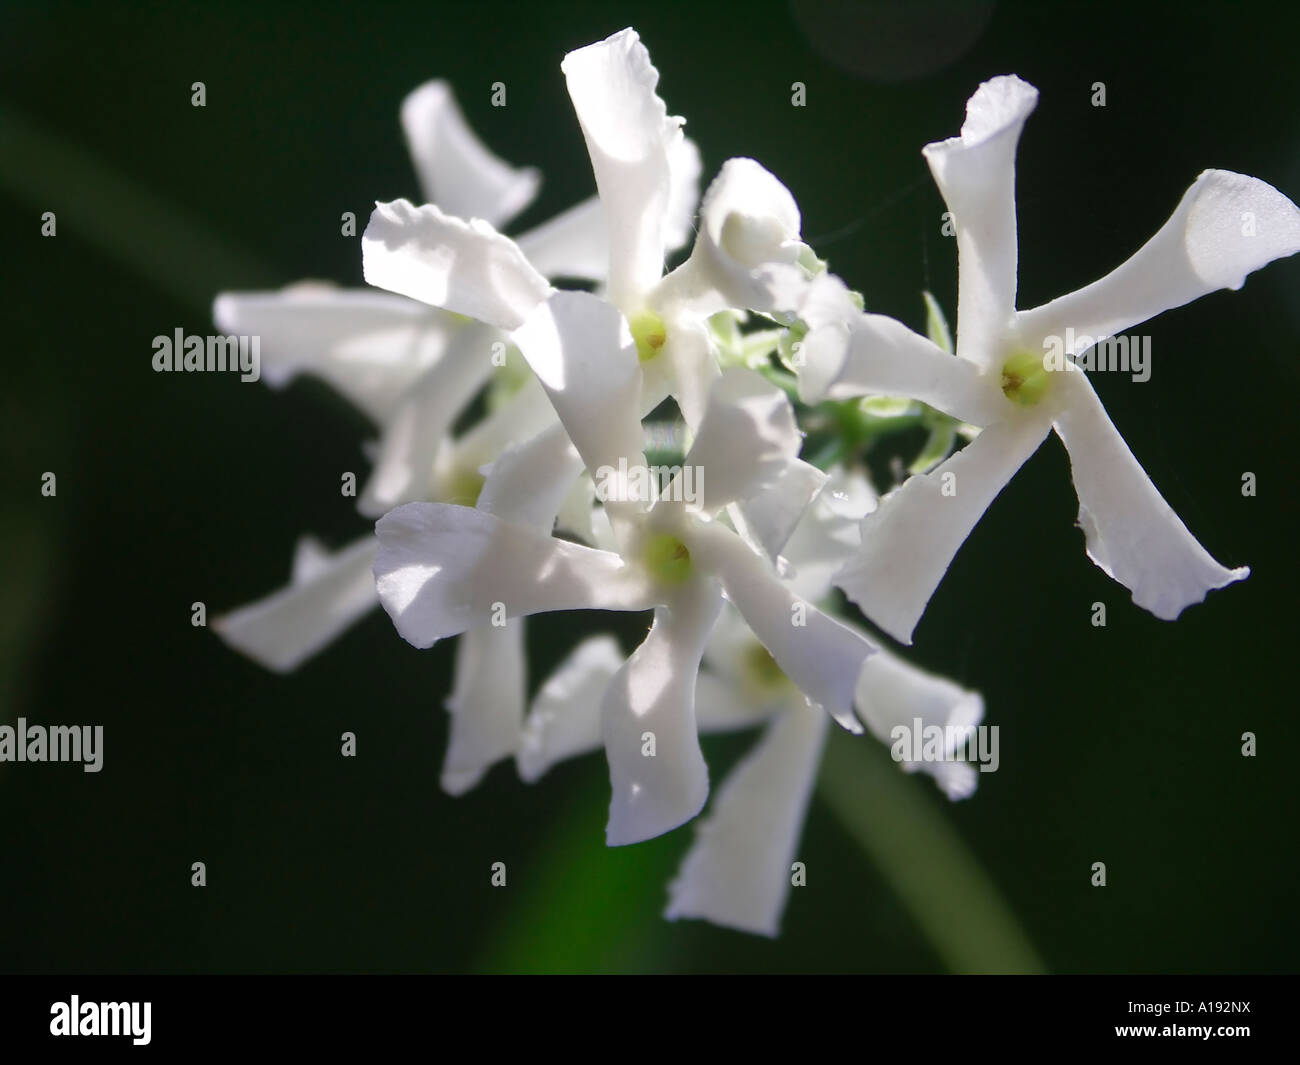 A close up of a cluster of Star Jasmine Trachelospermum jasminoides blossoms Stock Photo